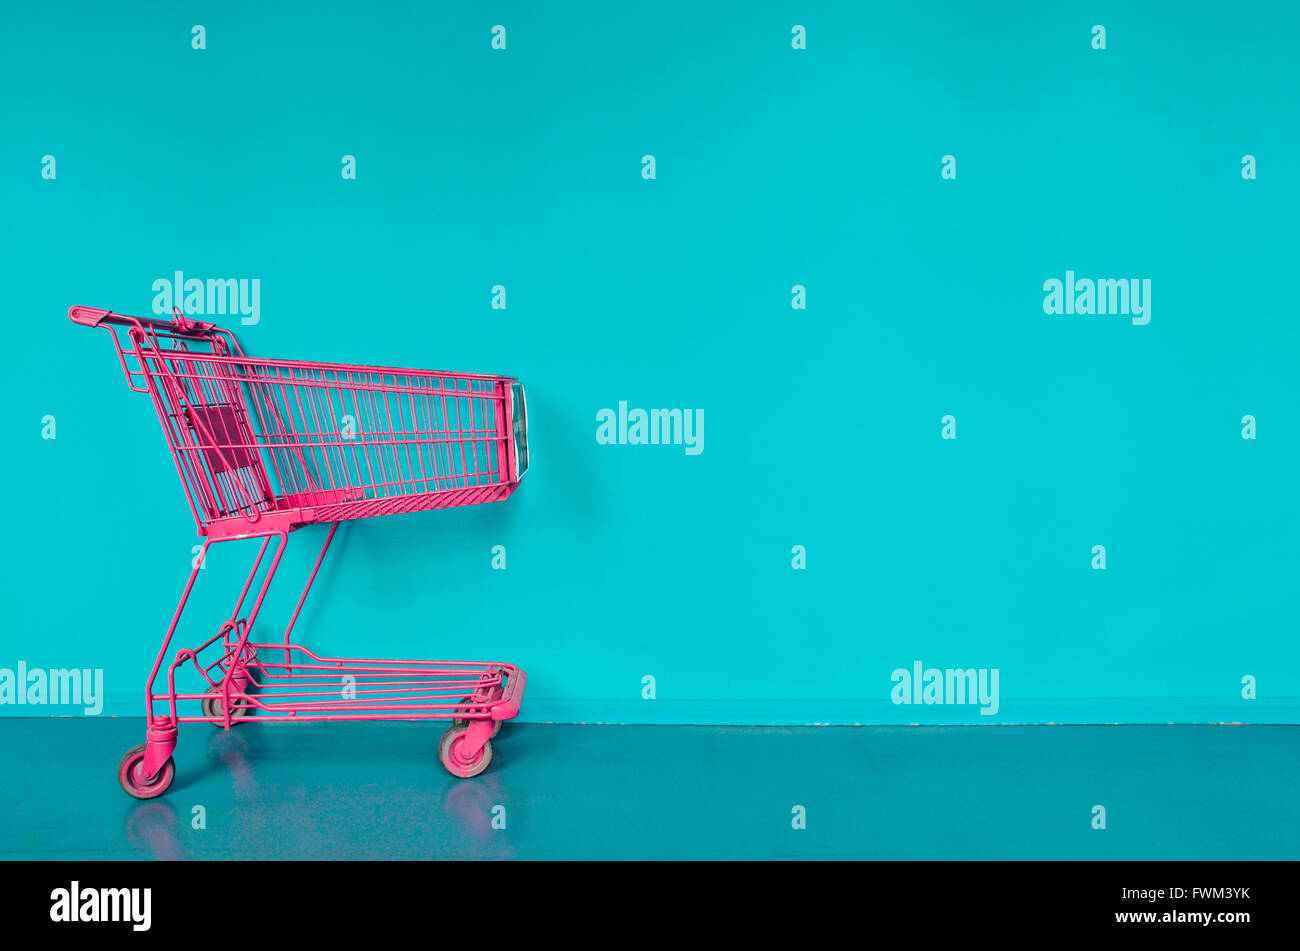 Pink Shopping Cart Against Turquoise Wall Stock Photo